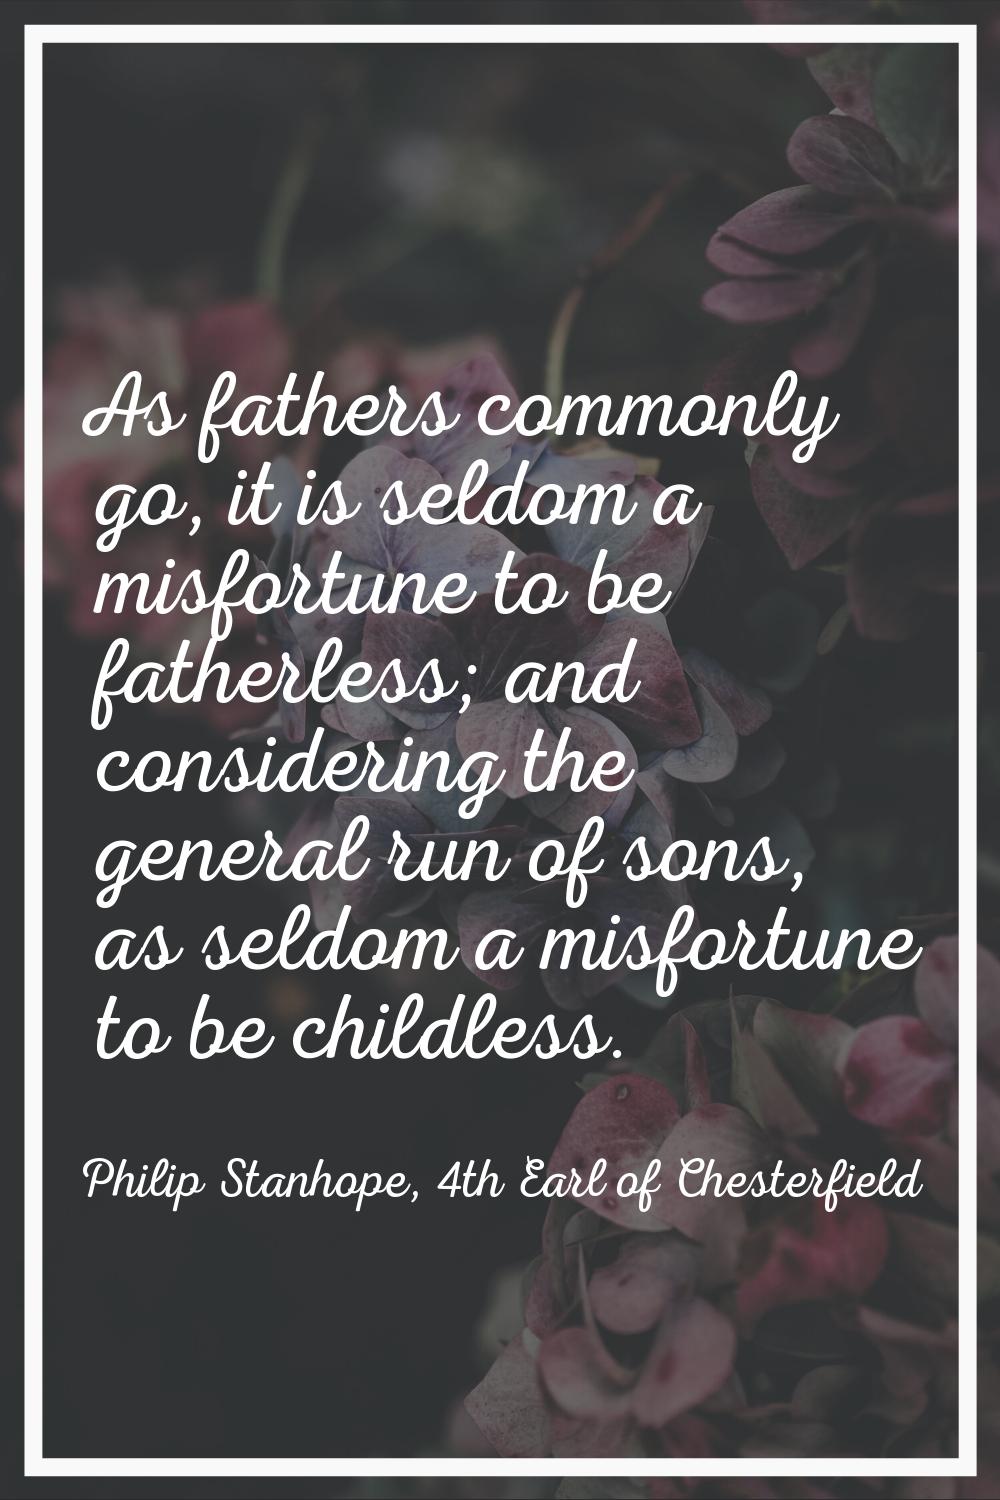 As fathers commonly go, it is seldom a misfortune to be fatherless; and considering the general run